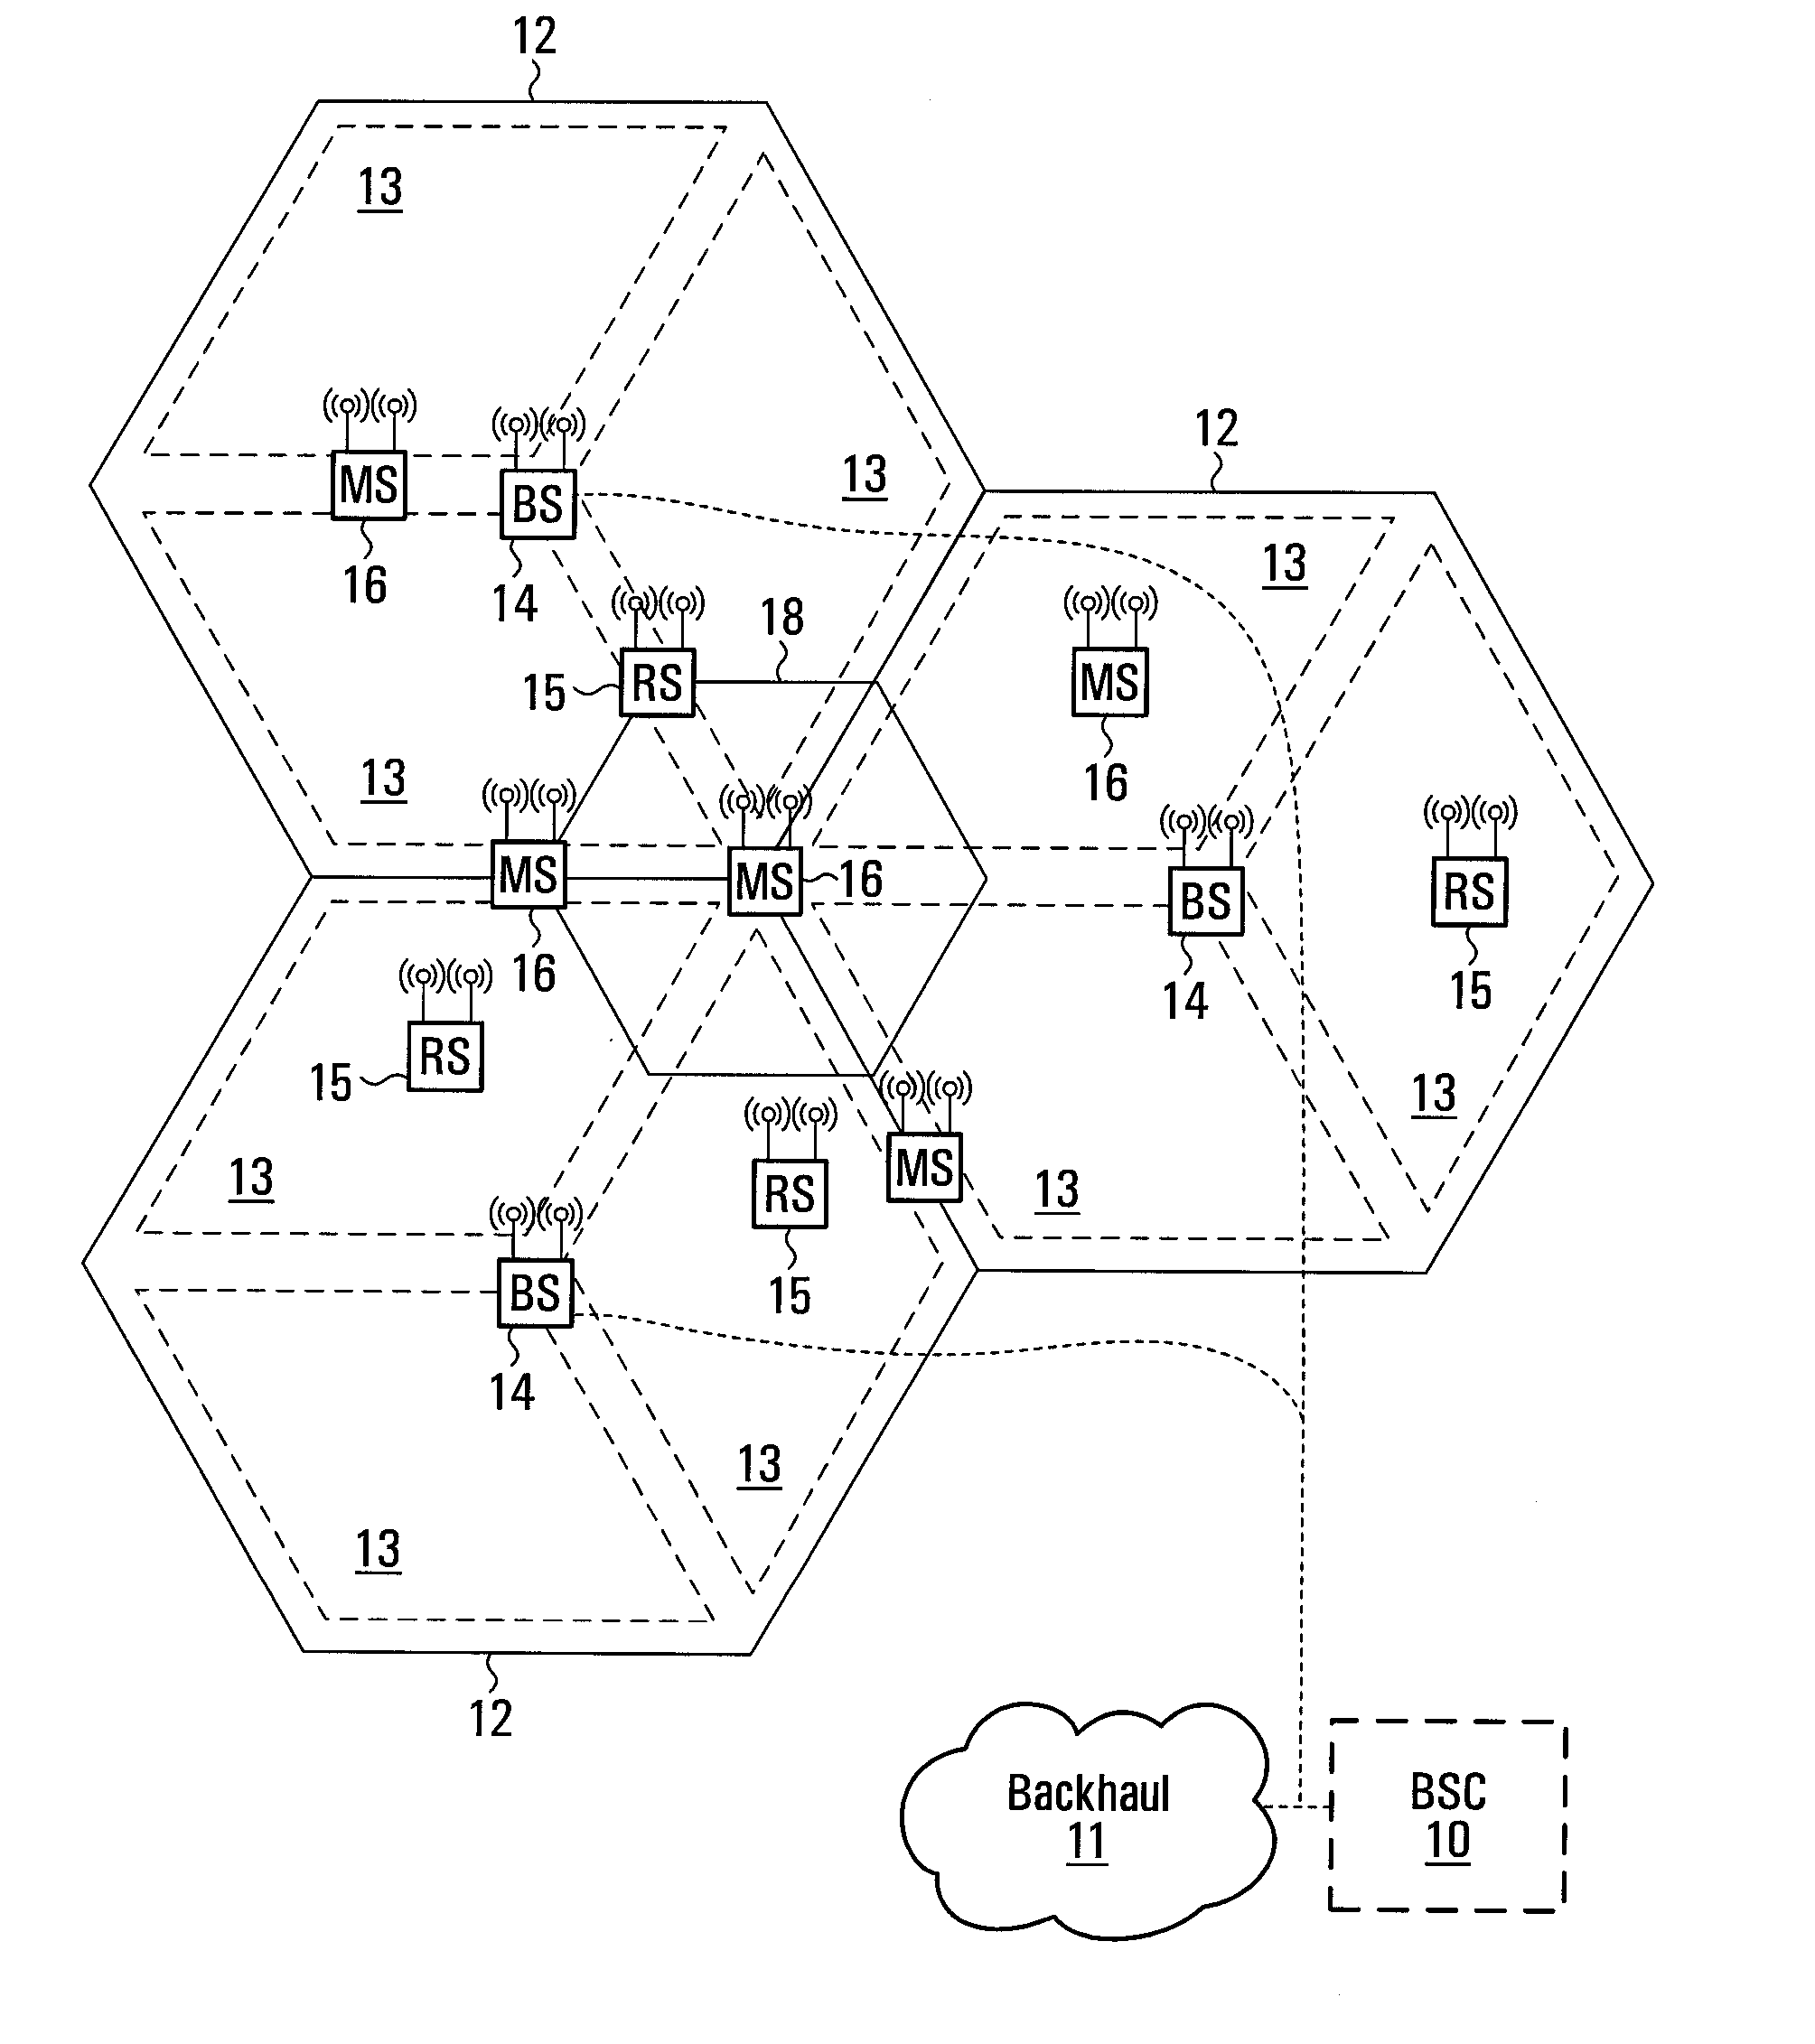 Enabling downlink transparent relay in a wireless communications network